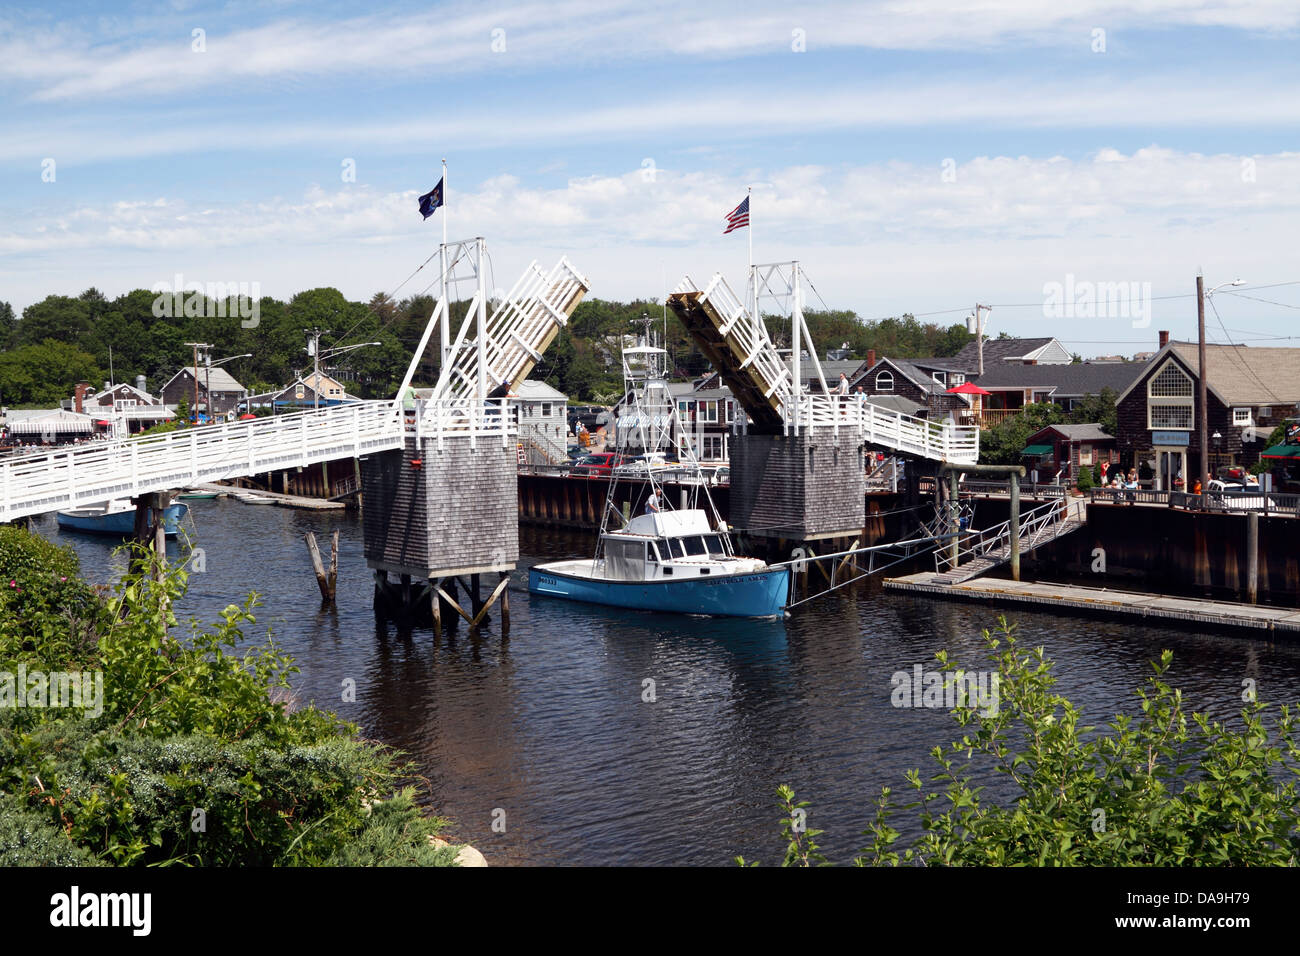 Boats passing under the open drawbridge at Perkins Cove, Ogunquit, Maine, USA. Oginquit is a popular New England vacation destination Stock Photo